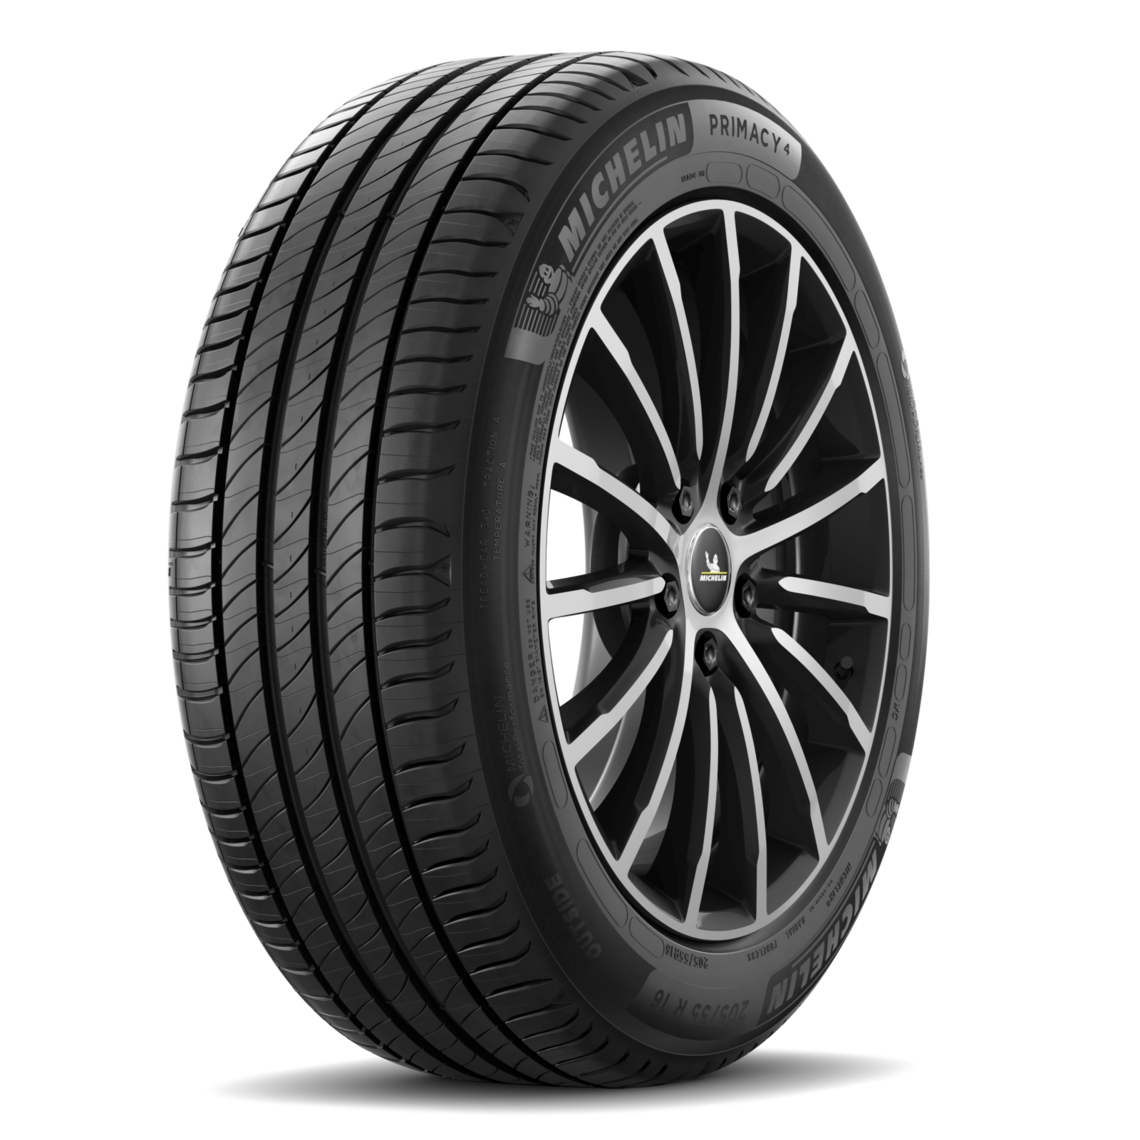 Michelin Primacy and Tests Reviews Tyre - 4